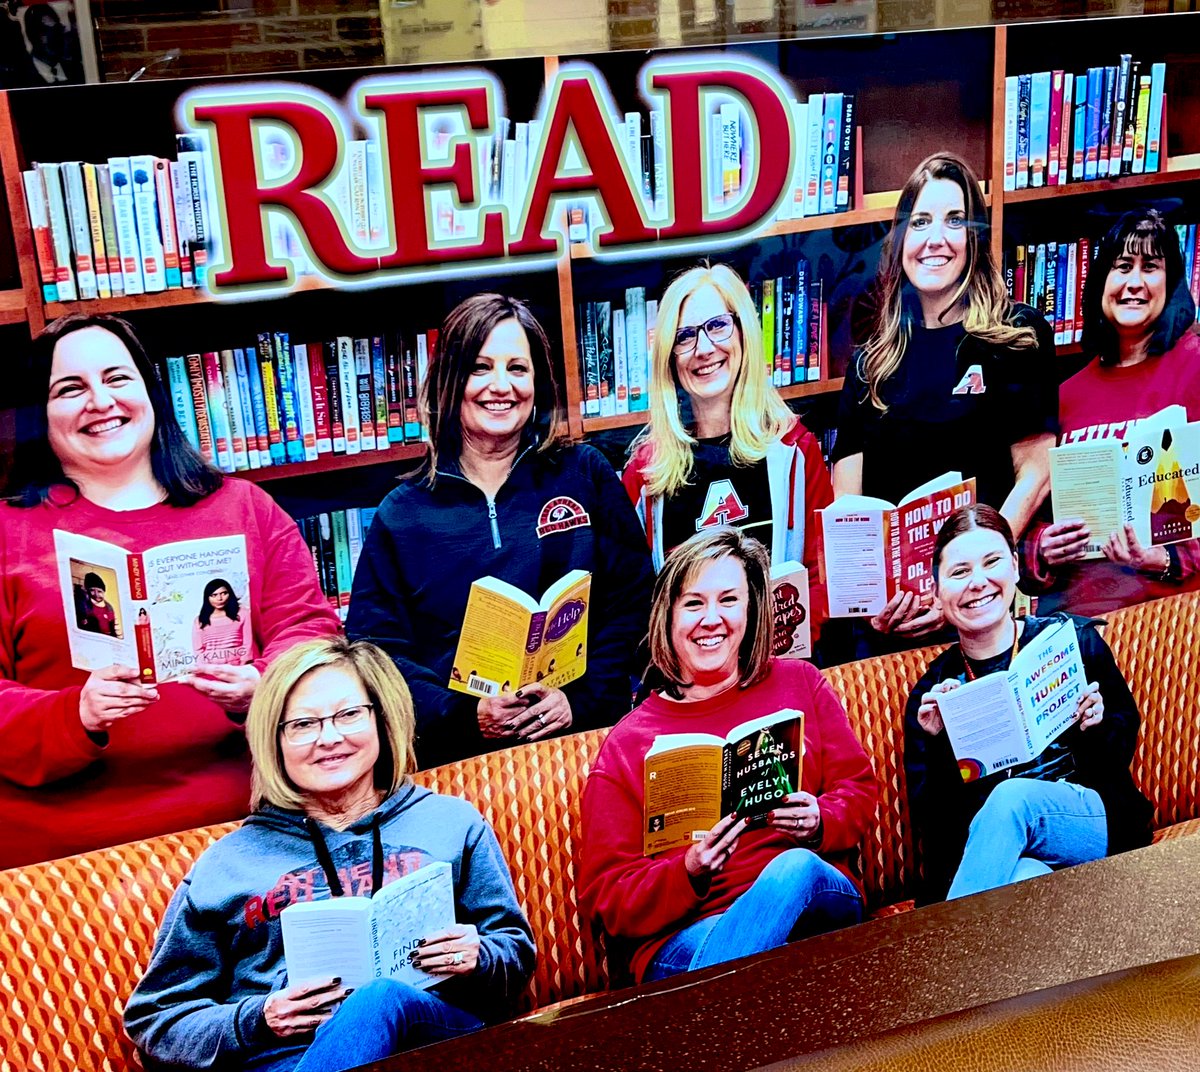 “March is Reading Month” @troy_athens @troyschools #readabook